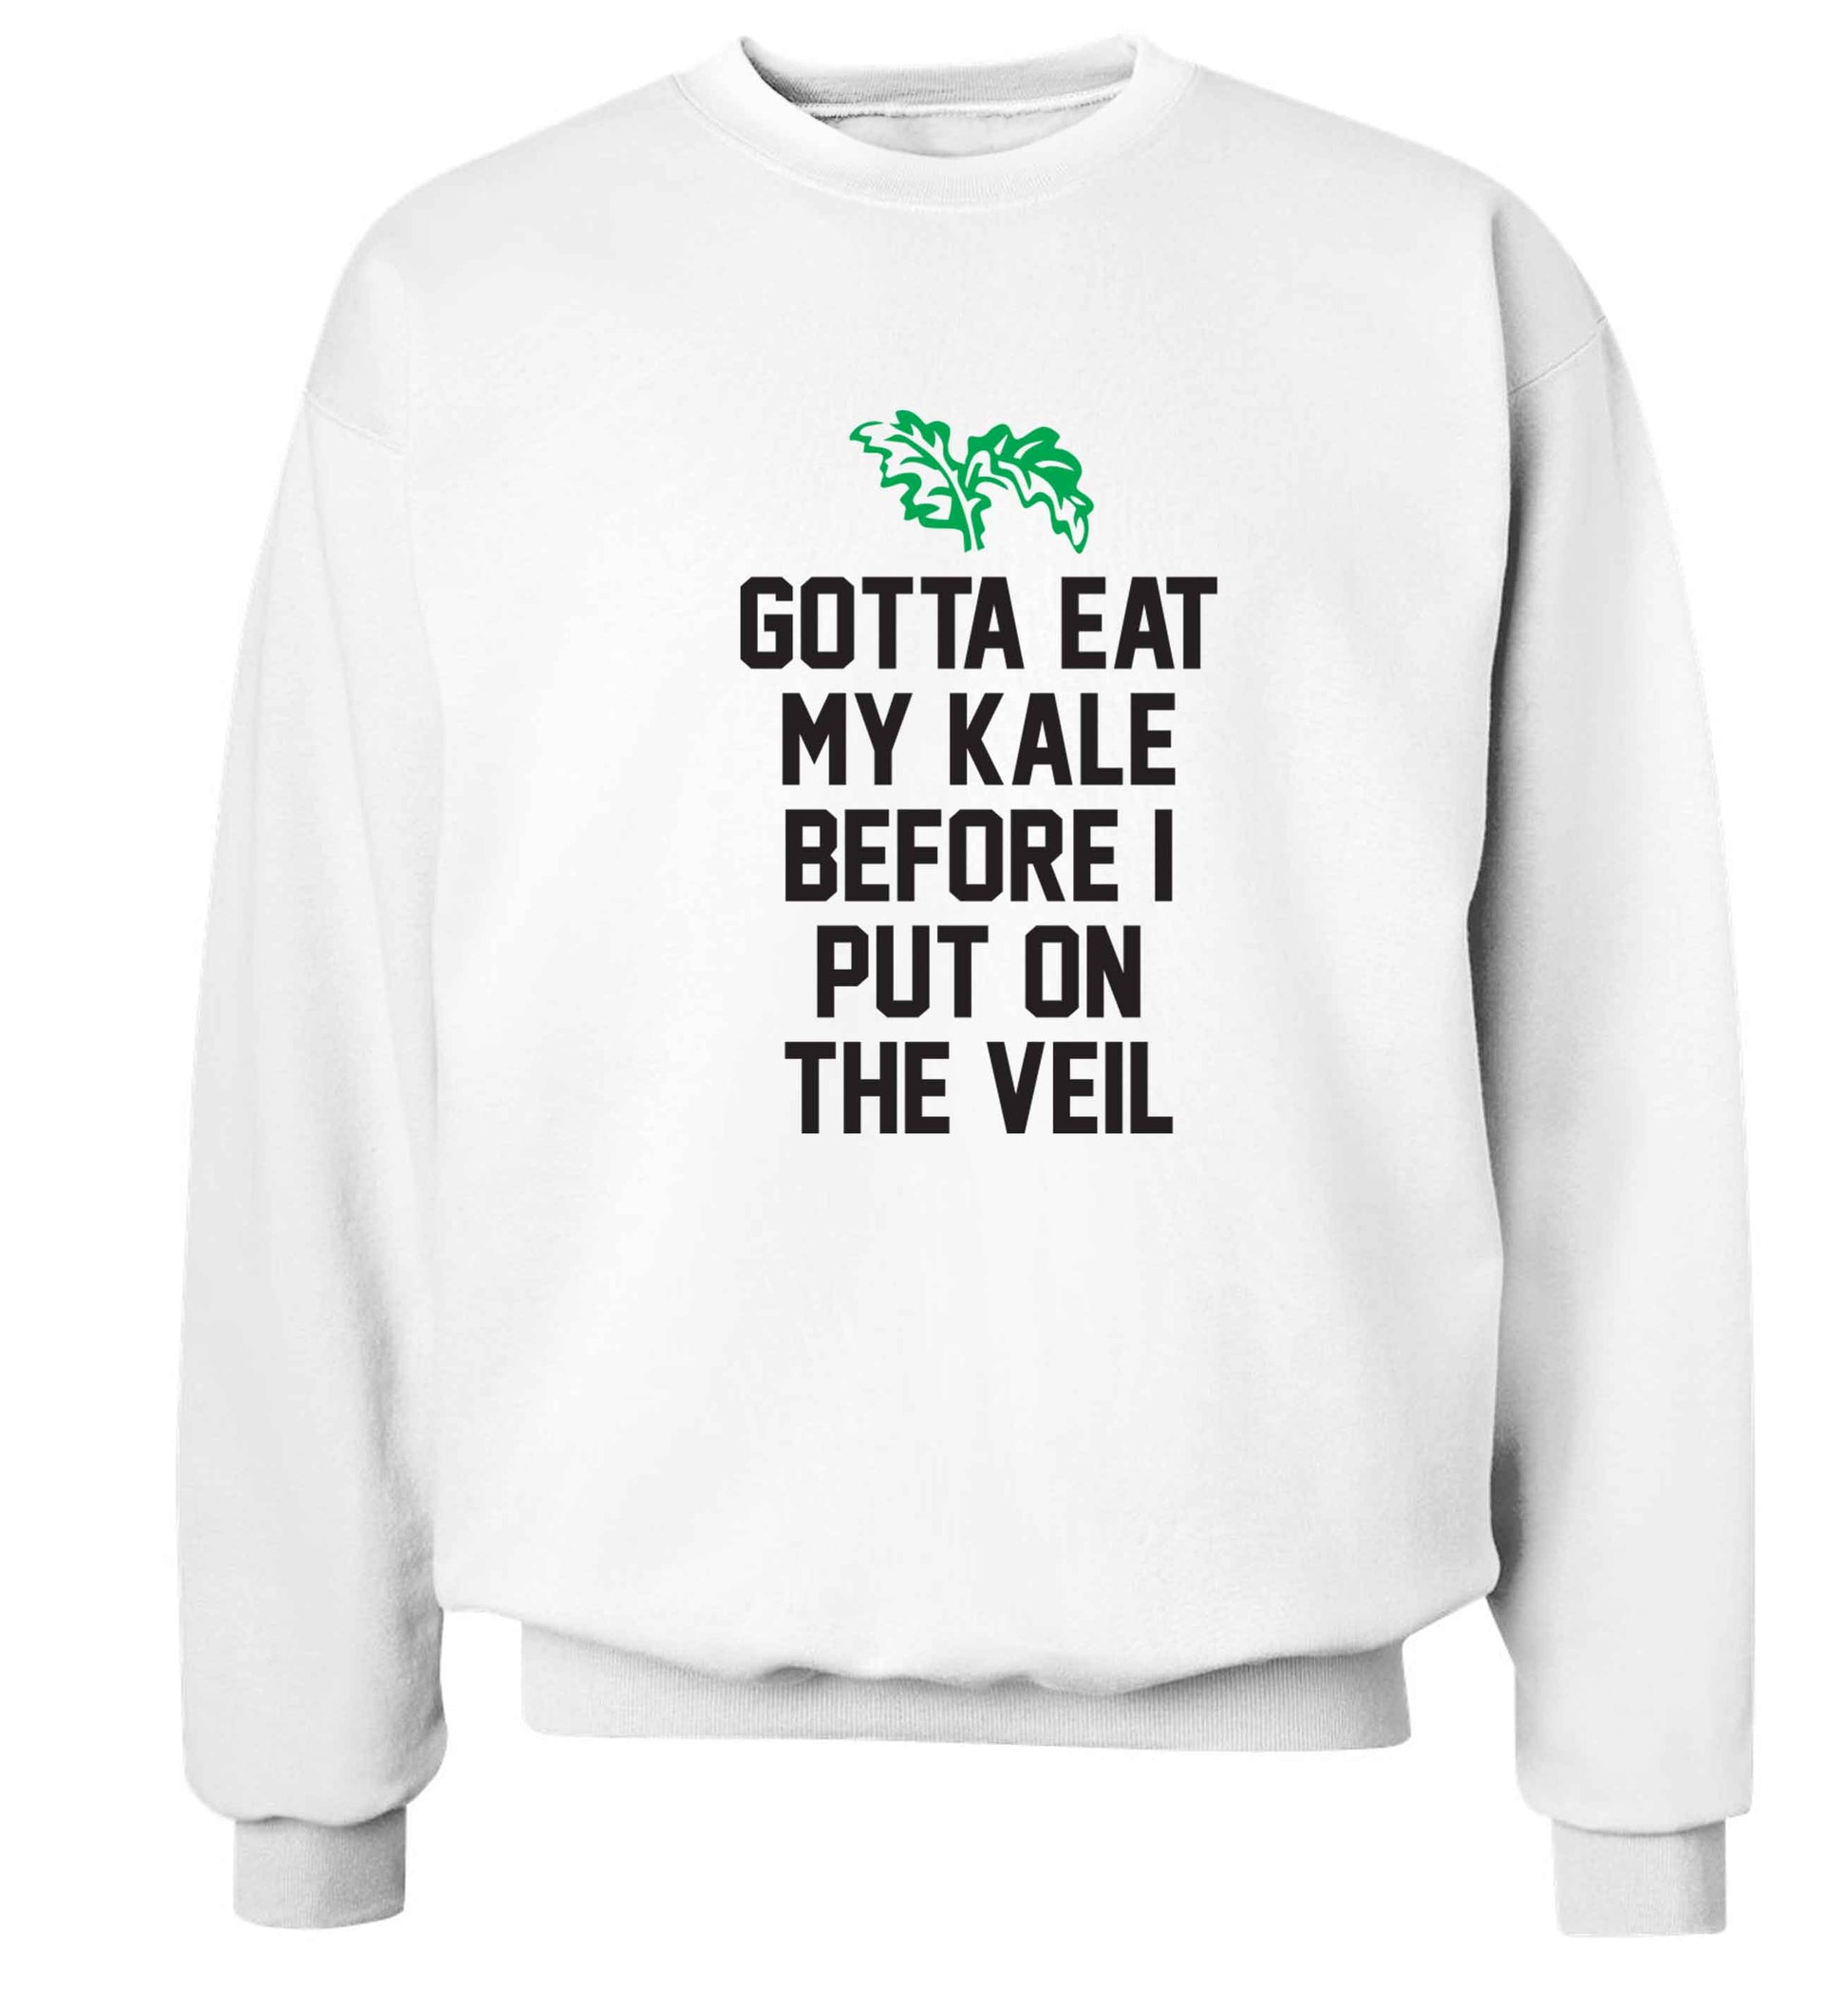 Gotta eat my kale before I put on the veil Adult's unisex white Sweater 2XL